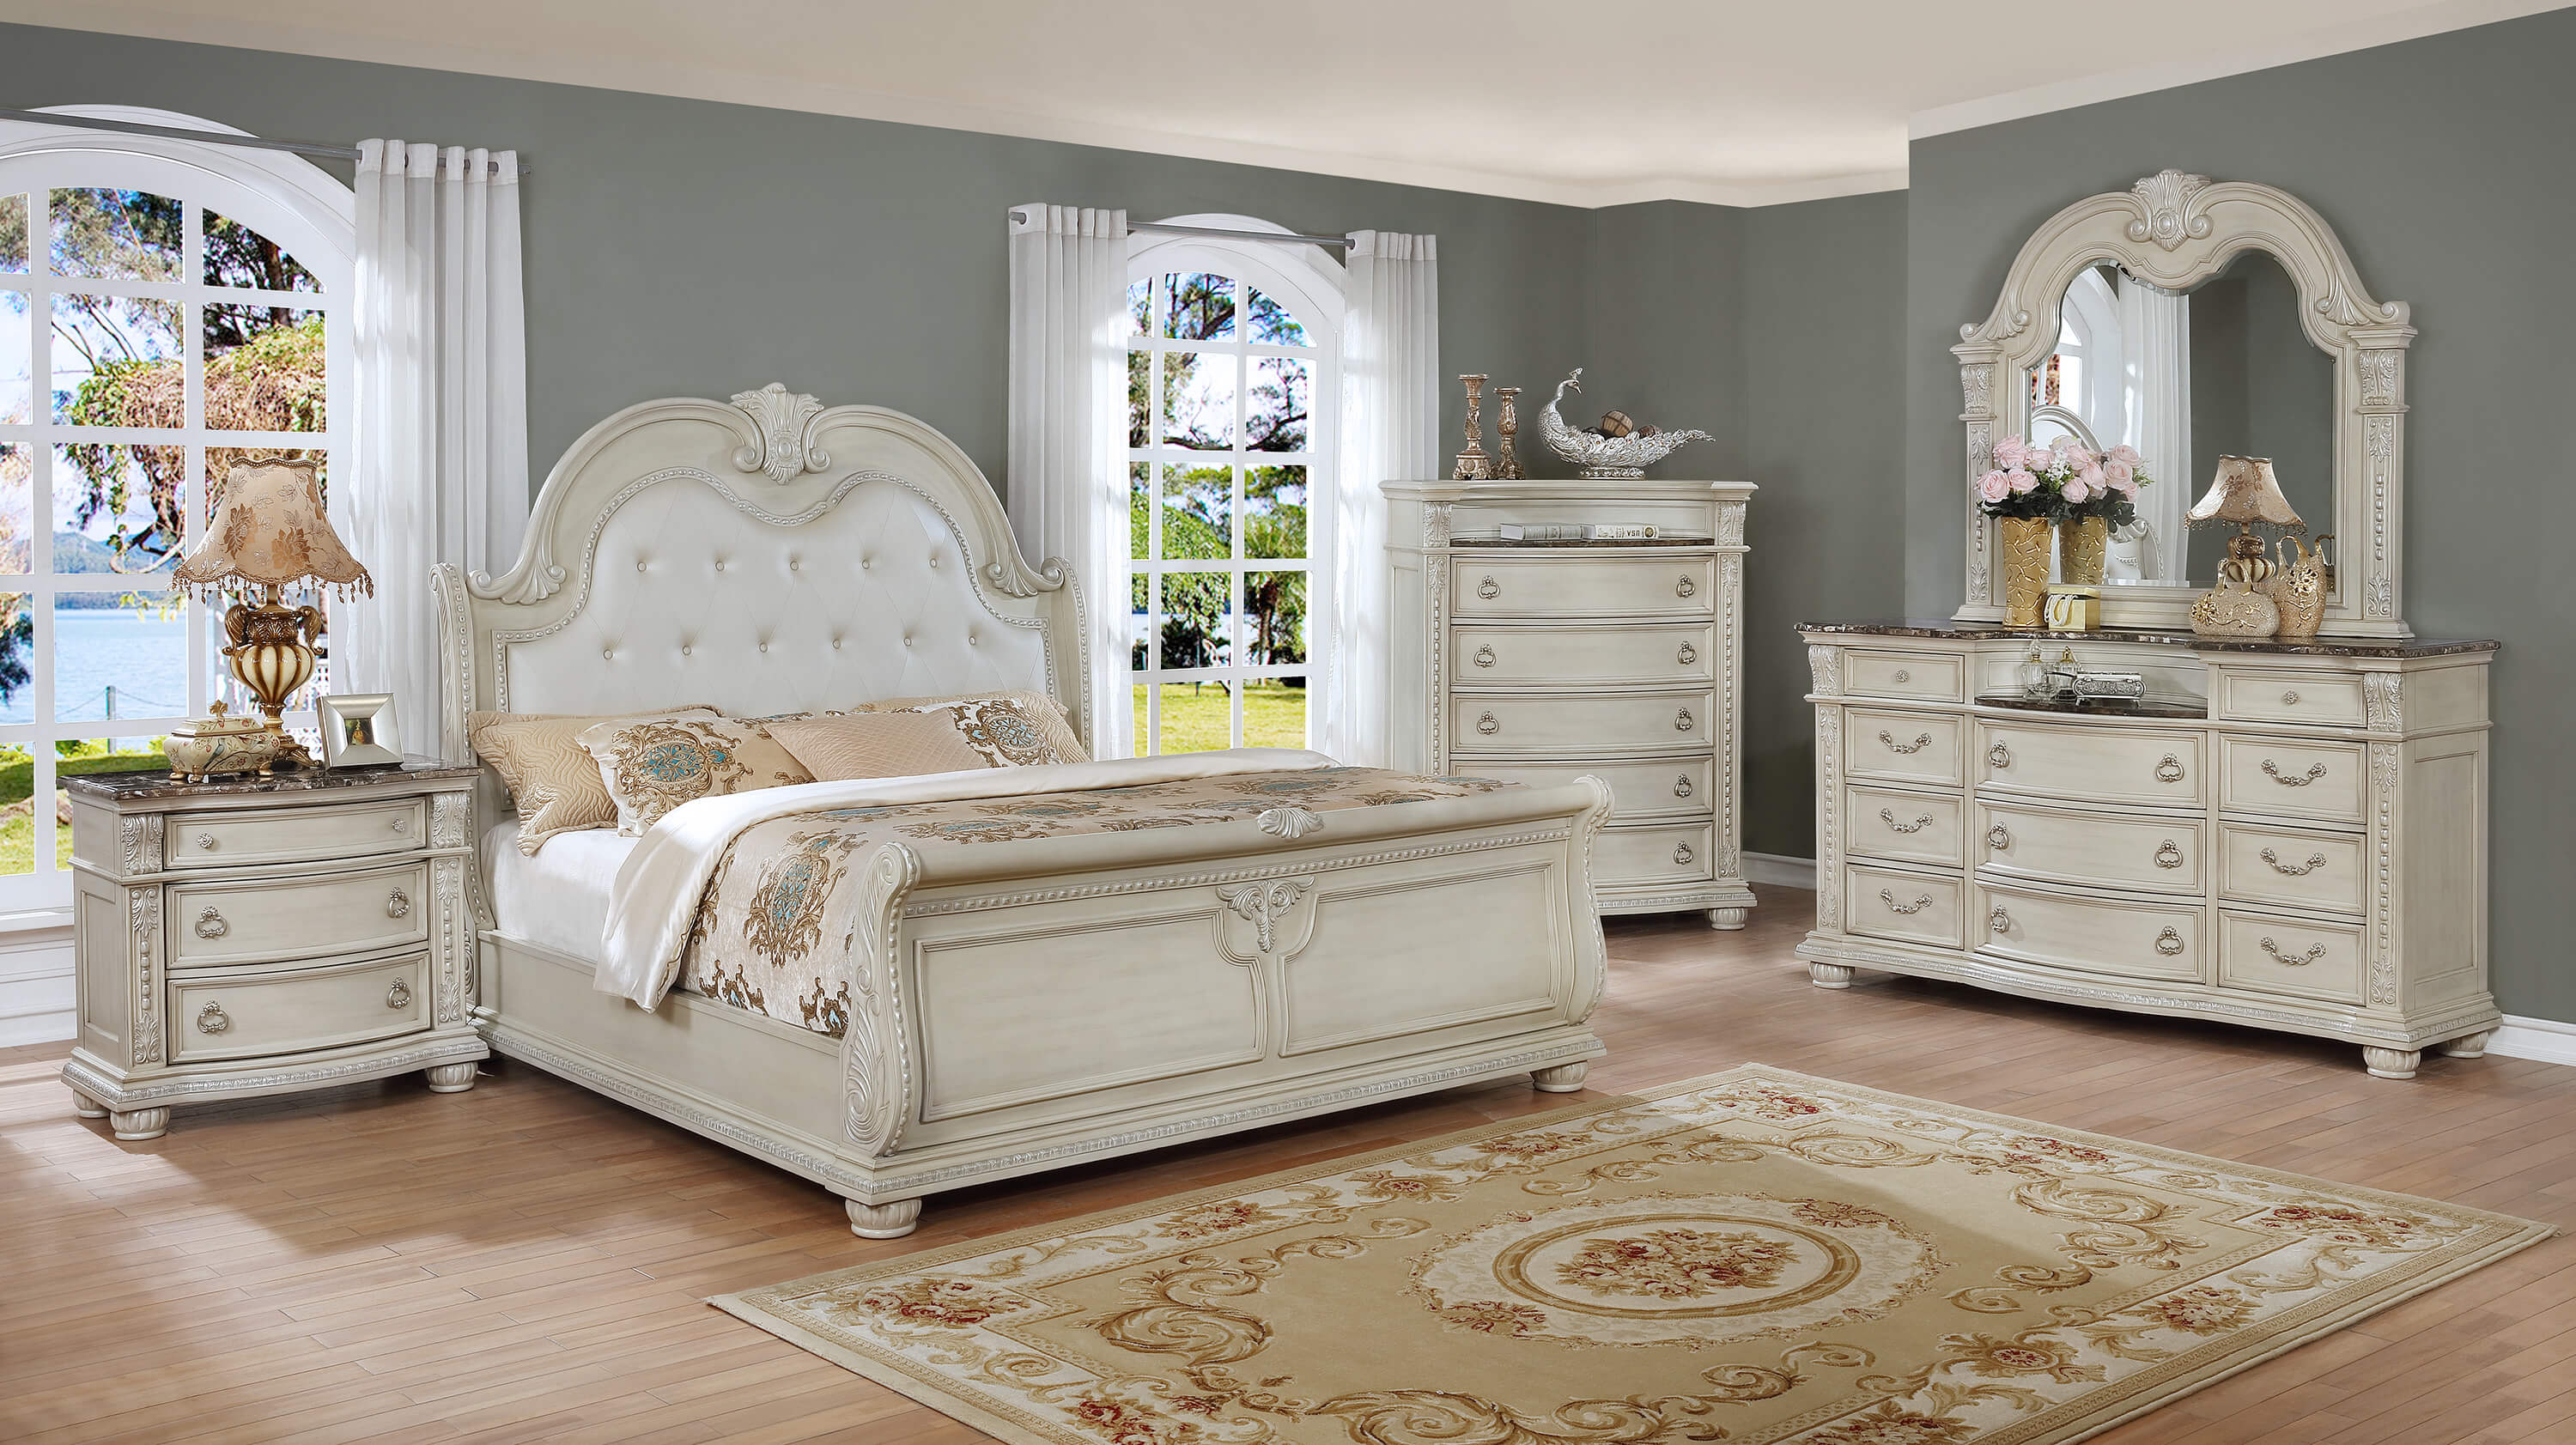 B1630 Stanley Antique White Marble Bedroom Set Crown Mark within size 3000 X 1683